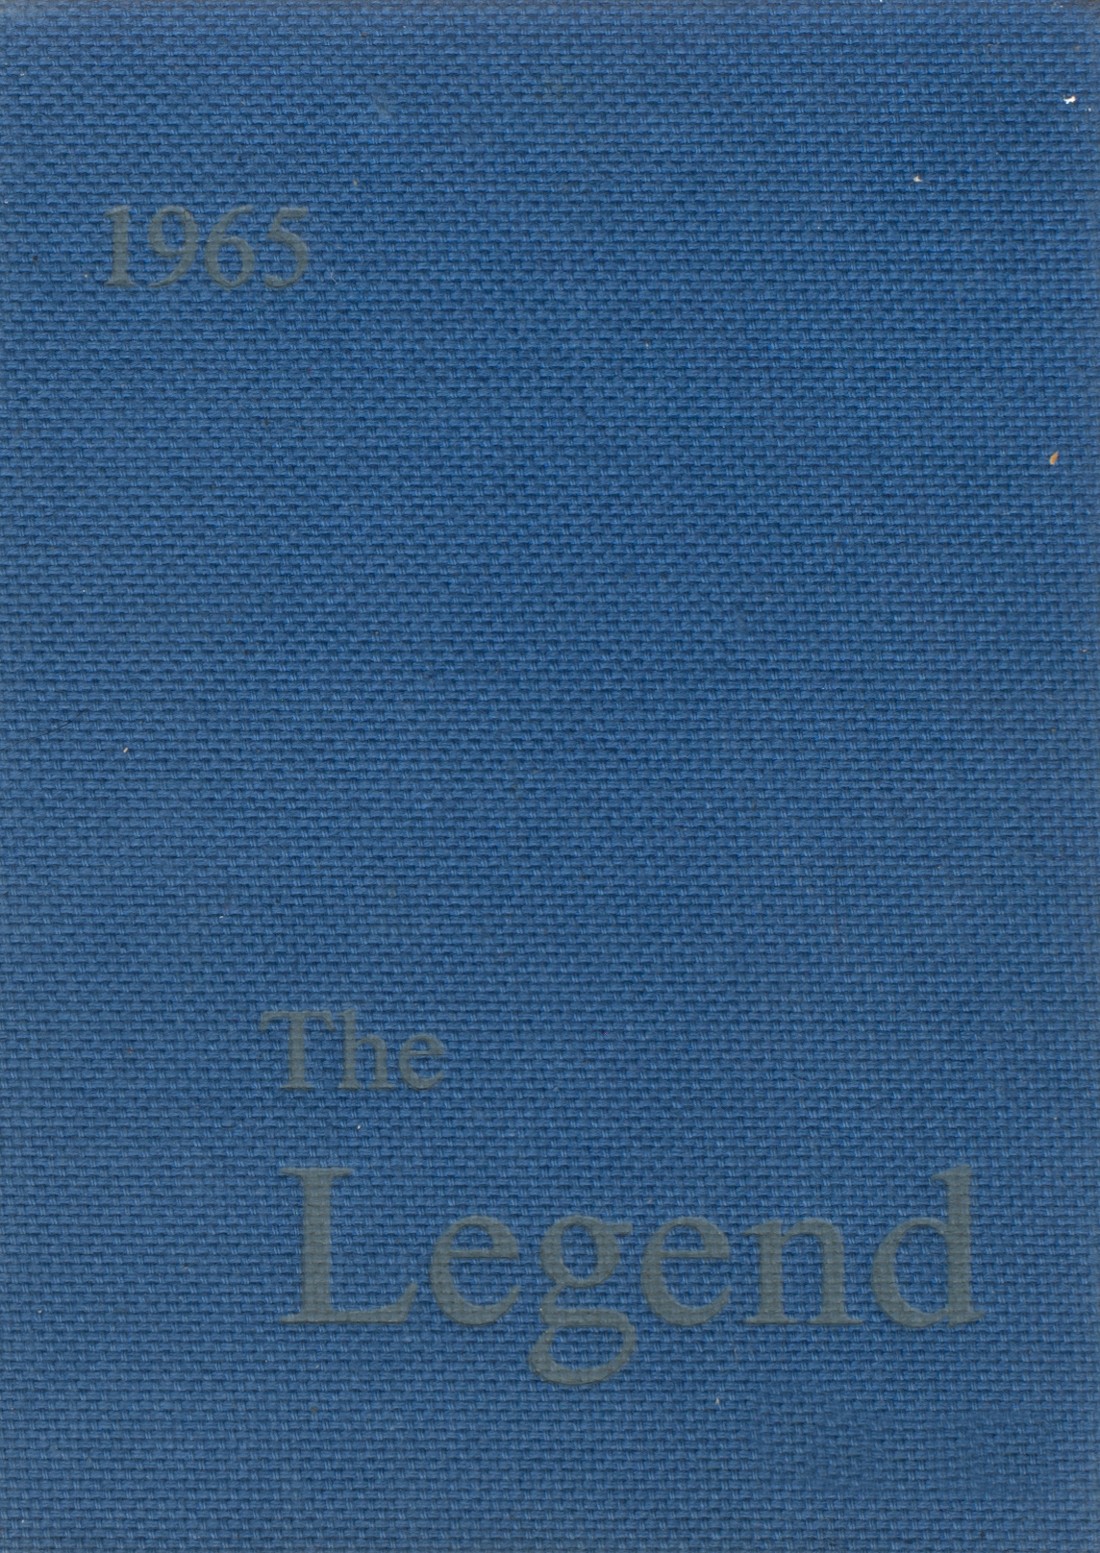 1965-yearbook-from-chief-logan-high-school-from-lewistown-pennsylvania